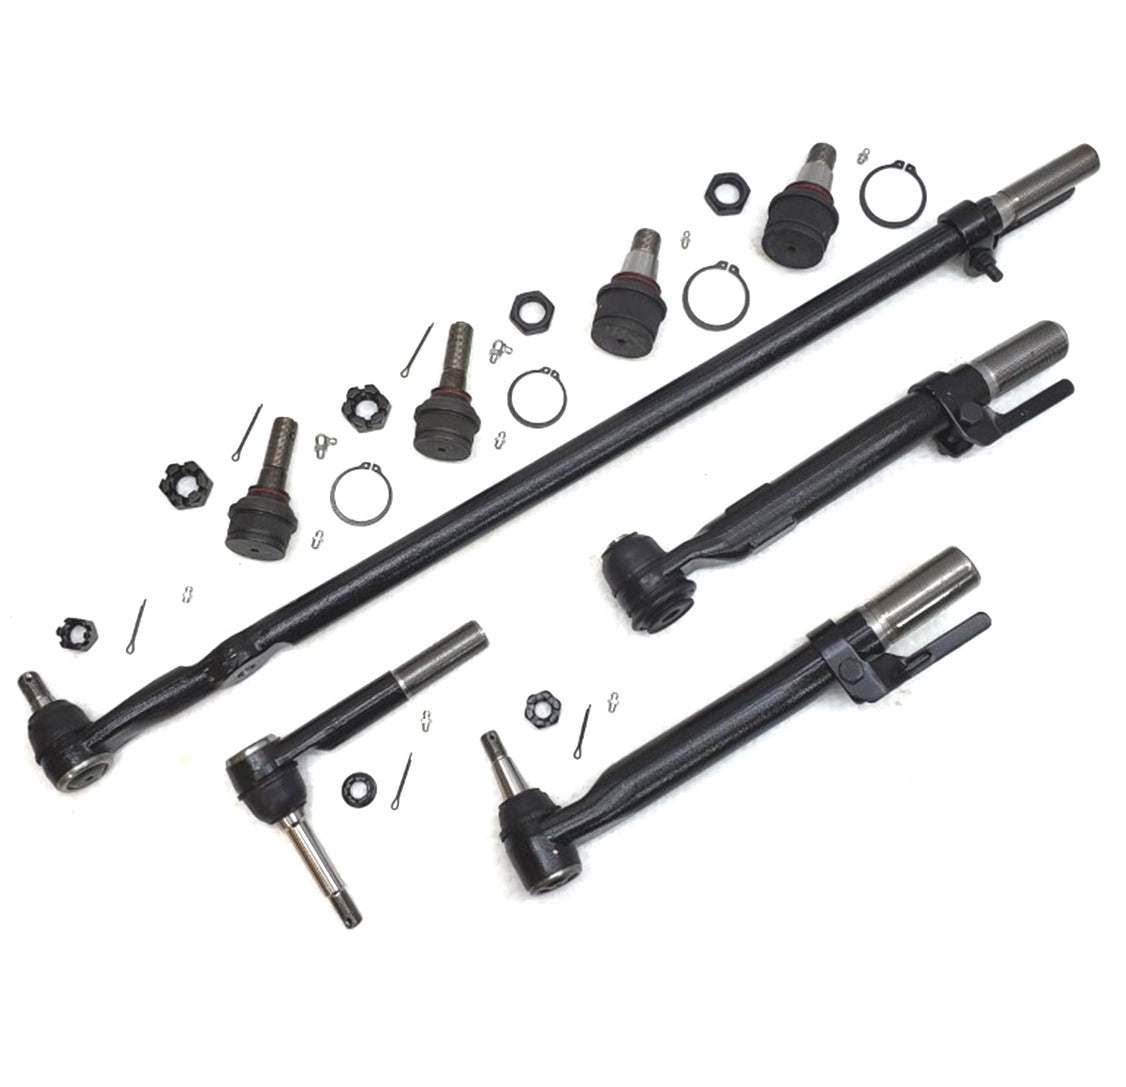 XRF Ball Joint Tie Rod Drag Link Steering Kit for 2011-2016 Ford F250, F350 Super Duty 4x4 DRW, Wide Track Axle